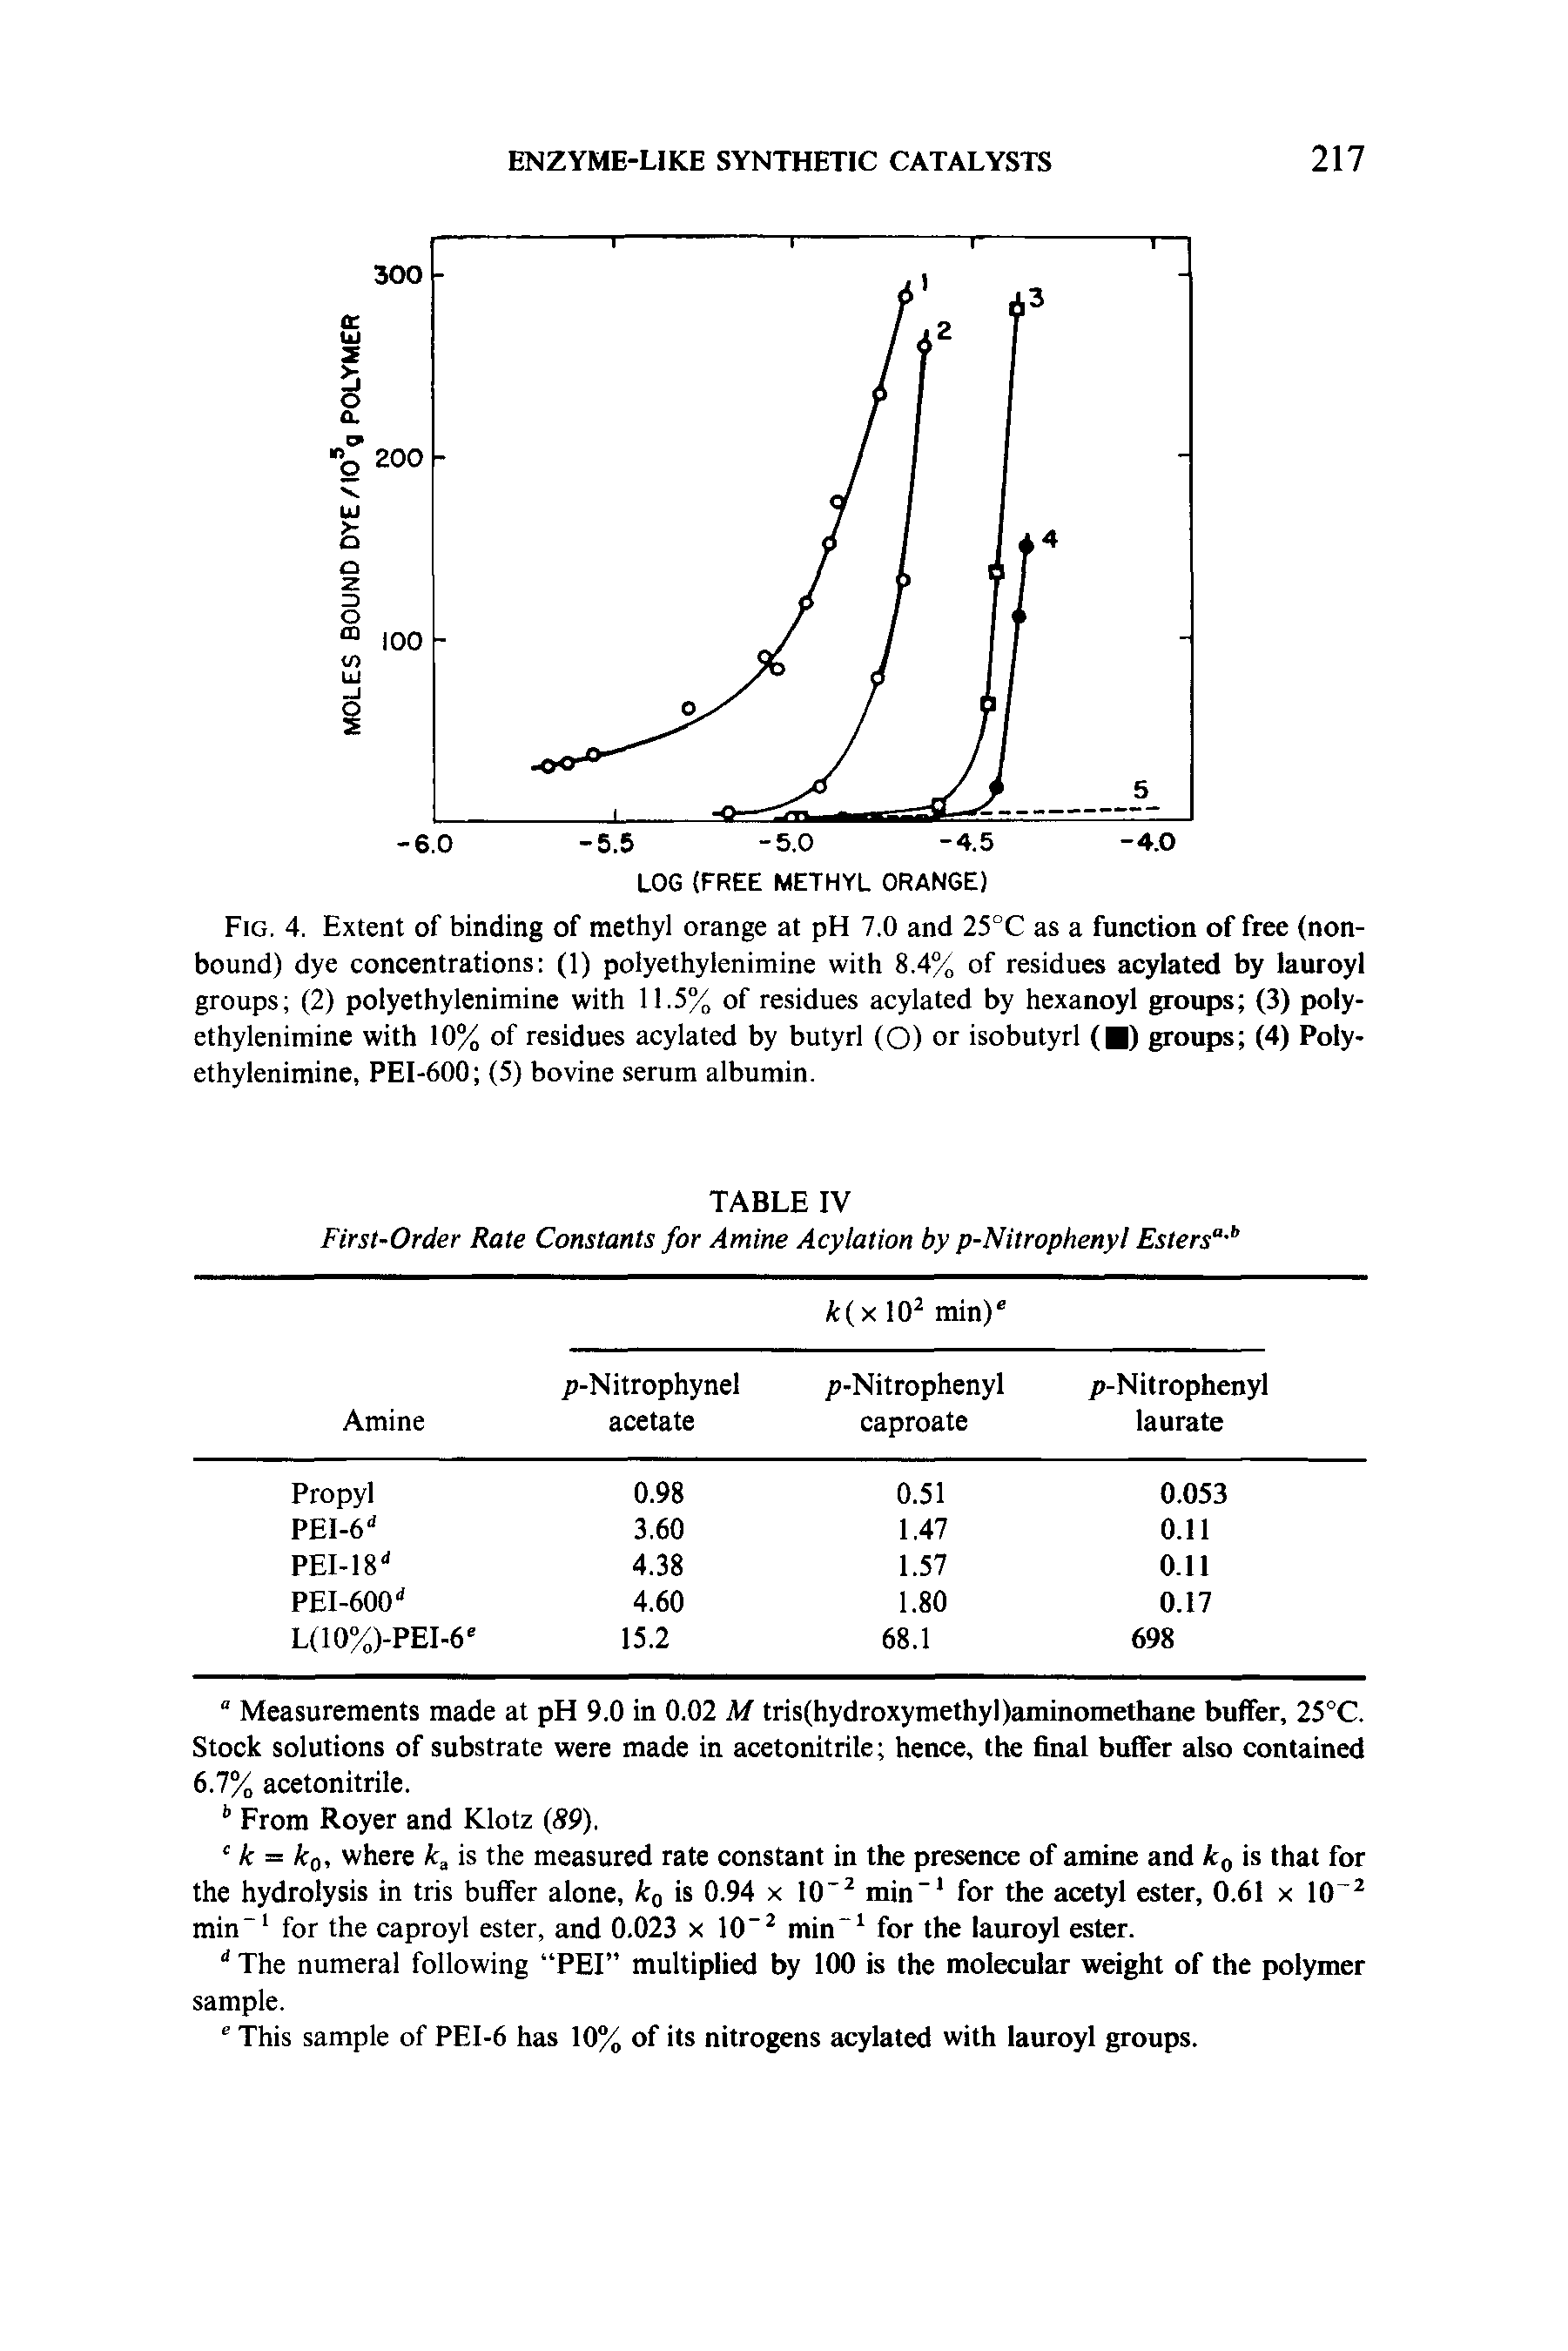 Fig. 4. Extent of binding of methyl orange at pH 7.0 and 25°C as a function of free (nonbound) dye concentrations (1) polyethylenimine with 8.4% of residues acylated by lauroyl groups (2) polyethylenimine with 11.5% of residues acylated by hexanoyl groups (3) polyethylenimine with 10% of residues acylated by butyrl (O) or isobutyrl ( ) groups (4) Polyethylenimine, PEI-600 (5) bovine serum albumin.